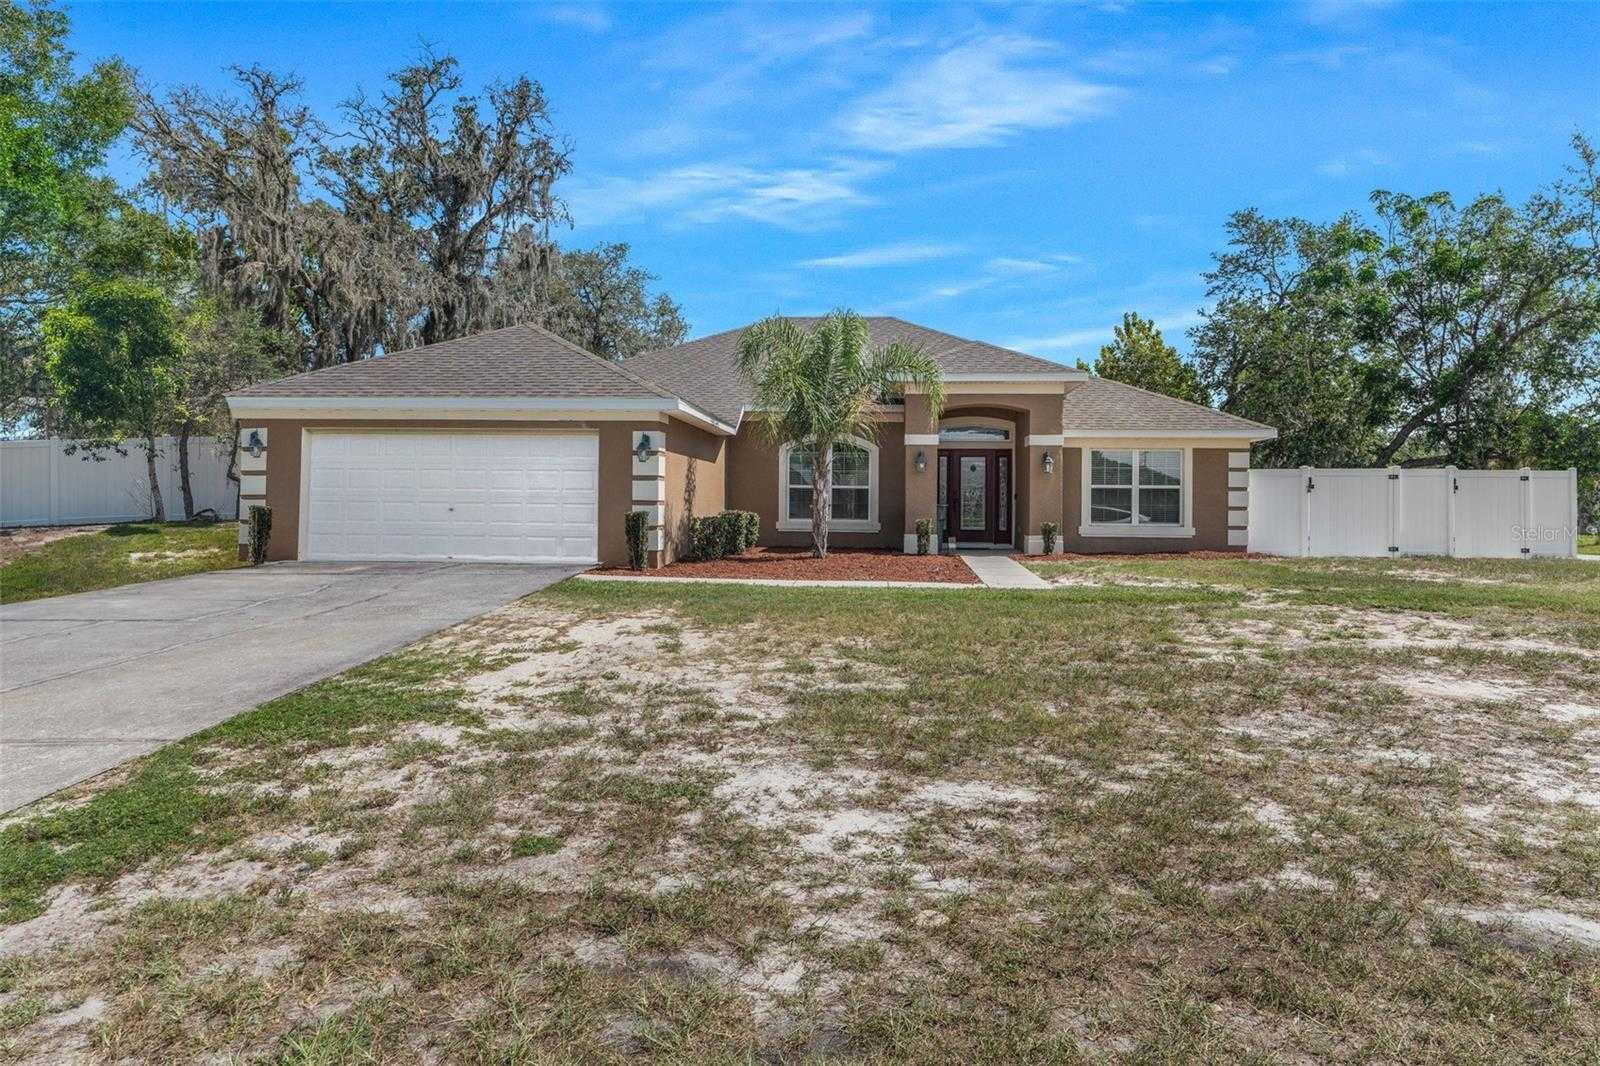 View SPRING HILL, FL 34609 house